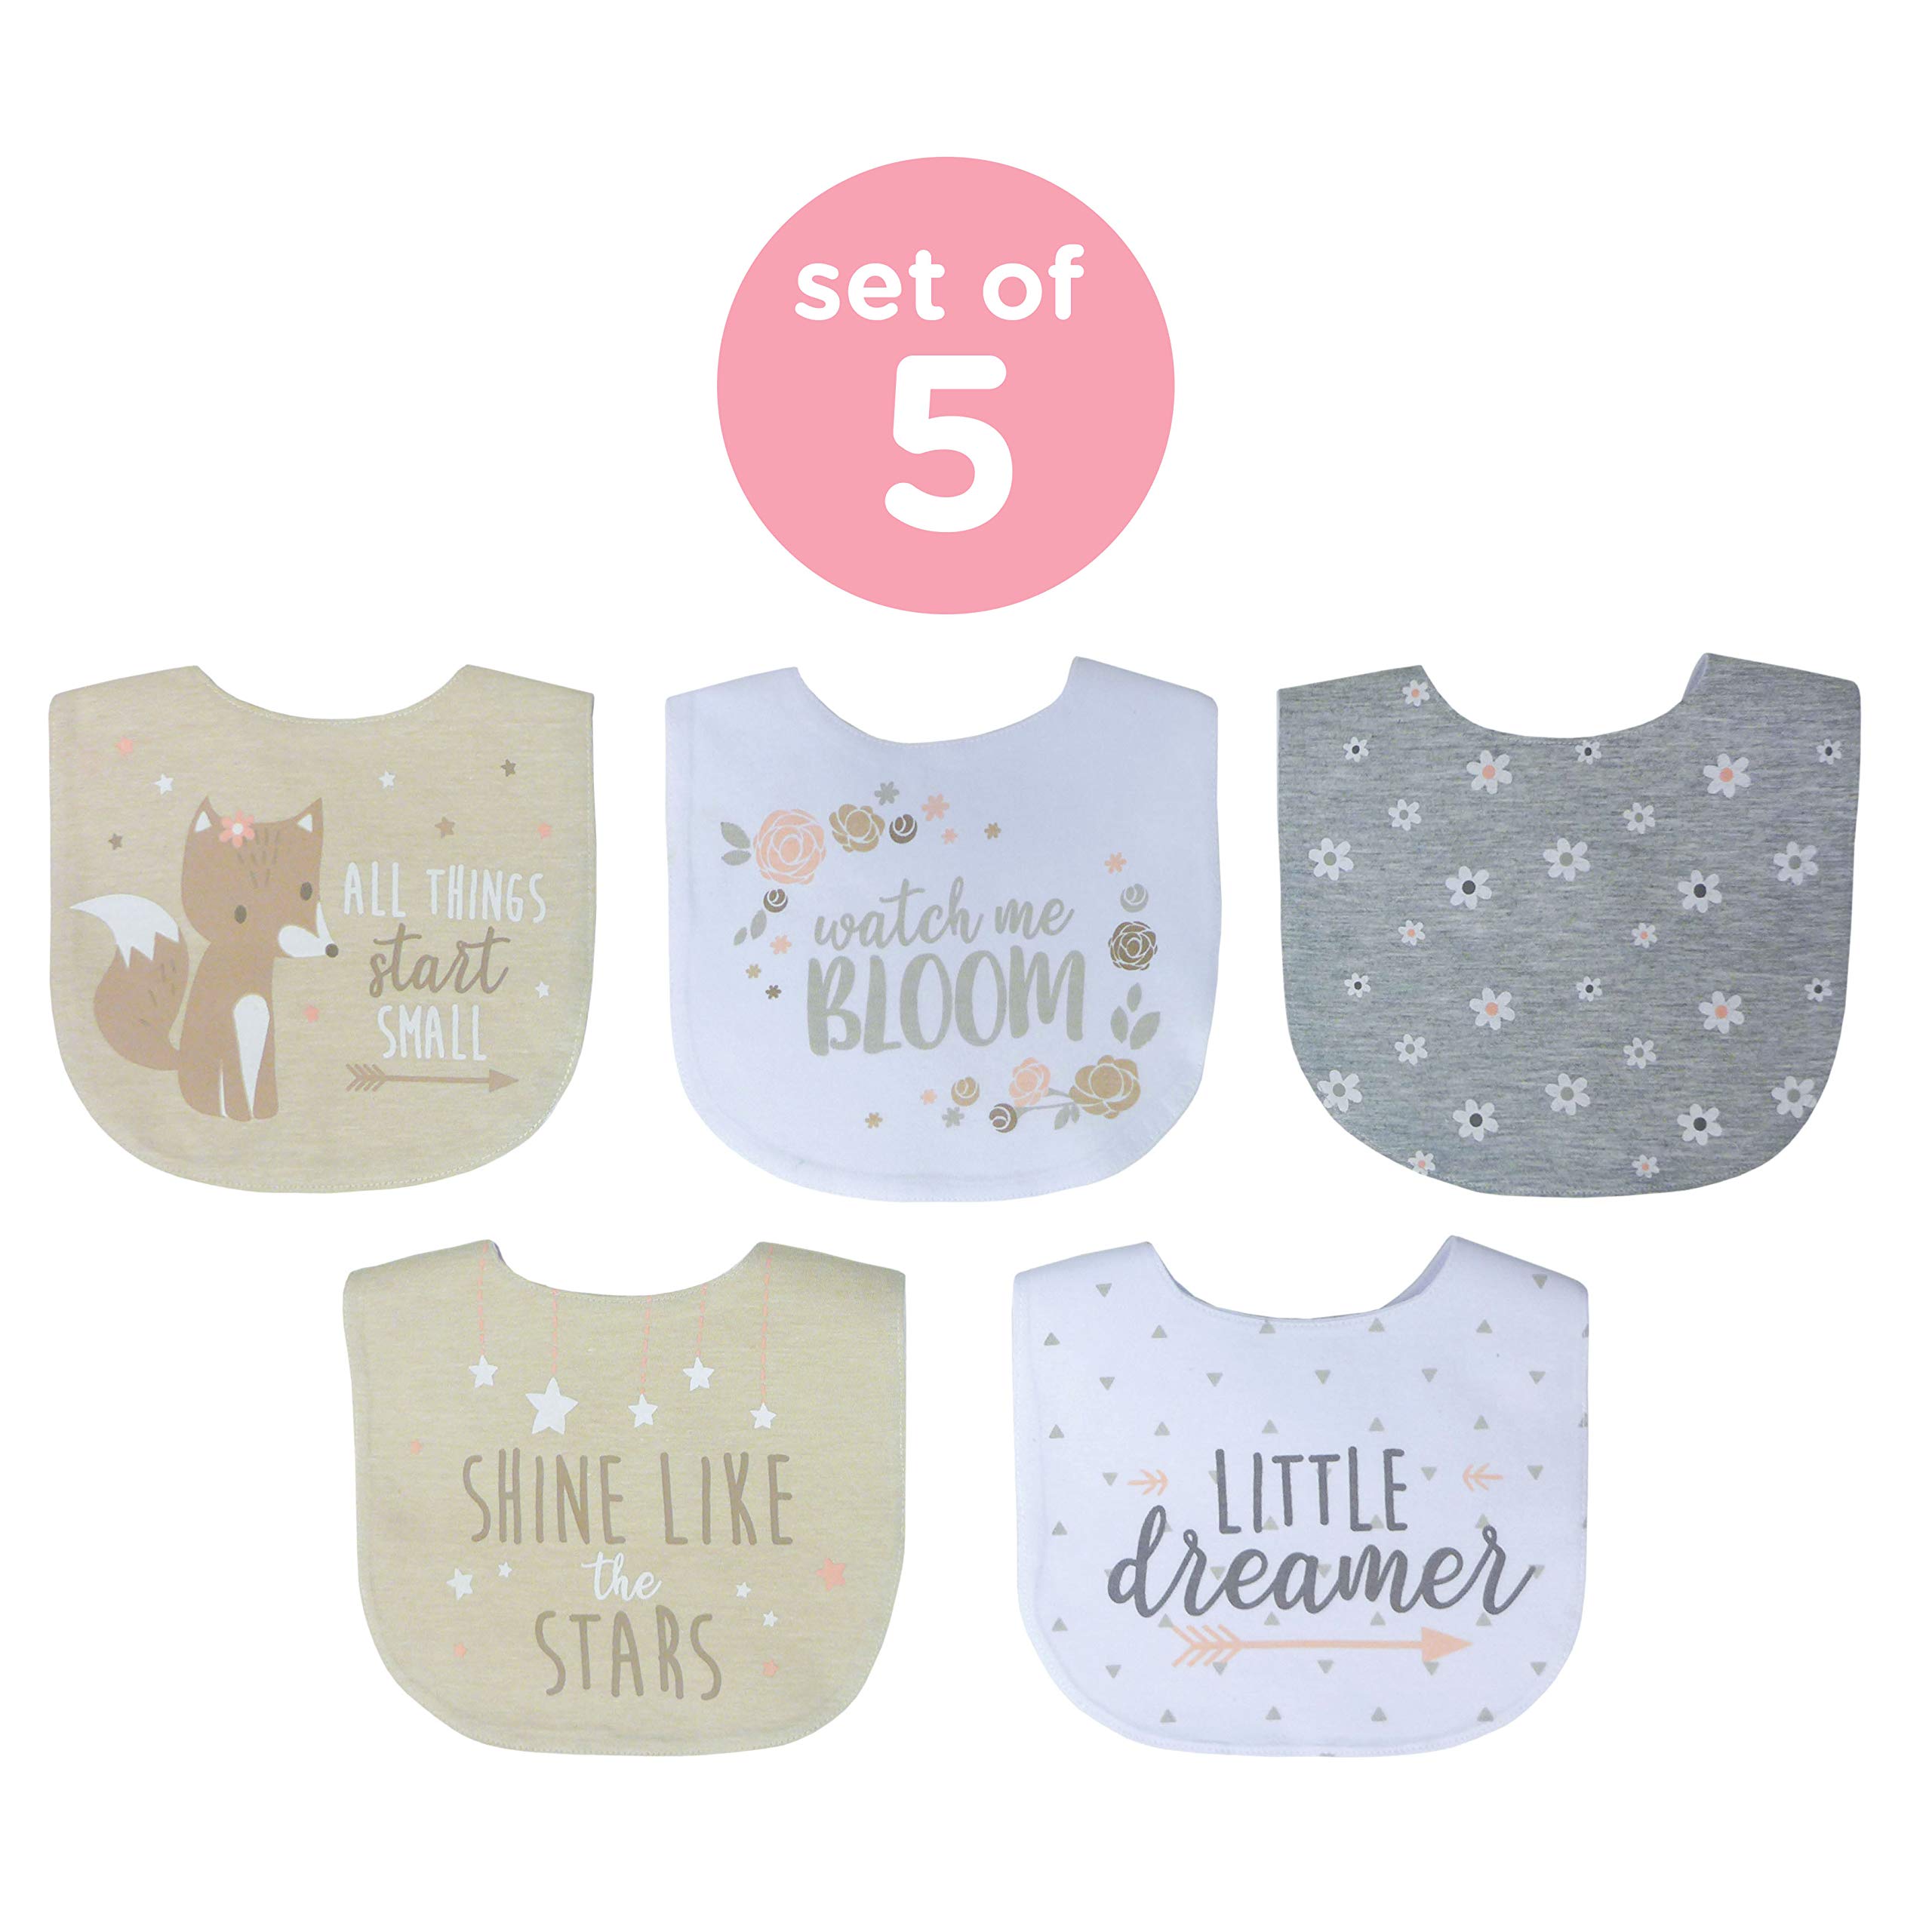 Neat Solutions 5 Pack Aspirational Bib Set with Mixed Fabrics & Water Resistant Inner Core - Girl, Grey Oatmeal While